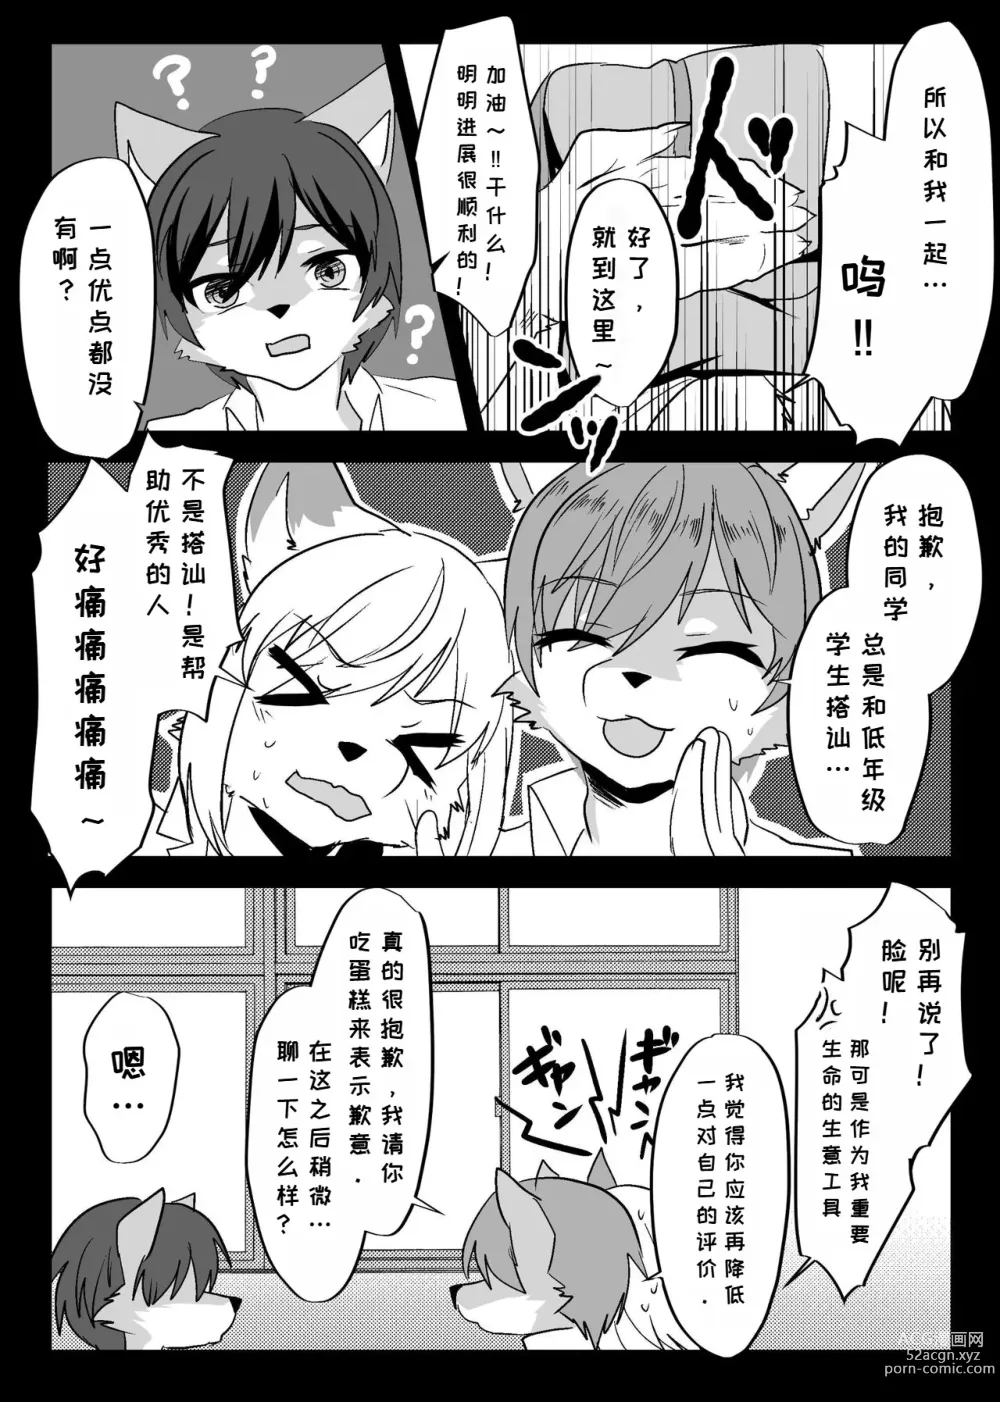 Page 5 of doujinshi 我们发情出勤科 3